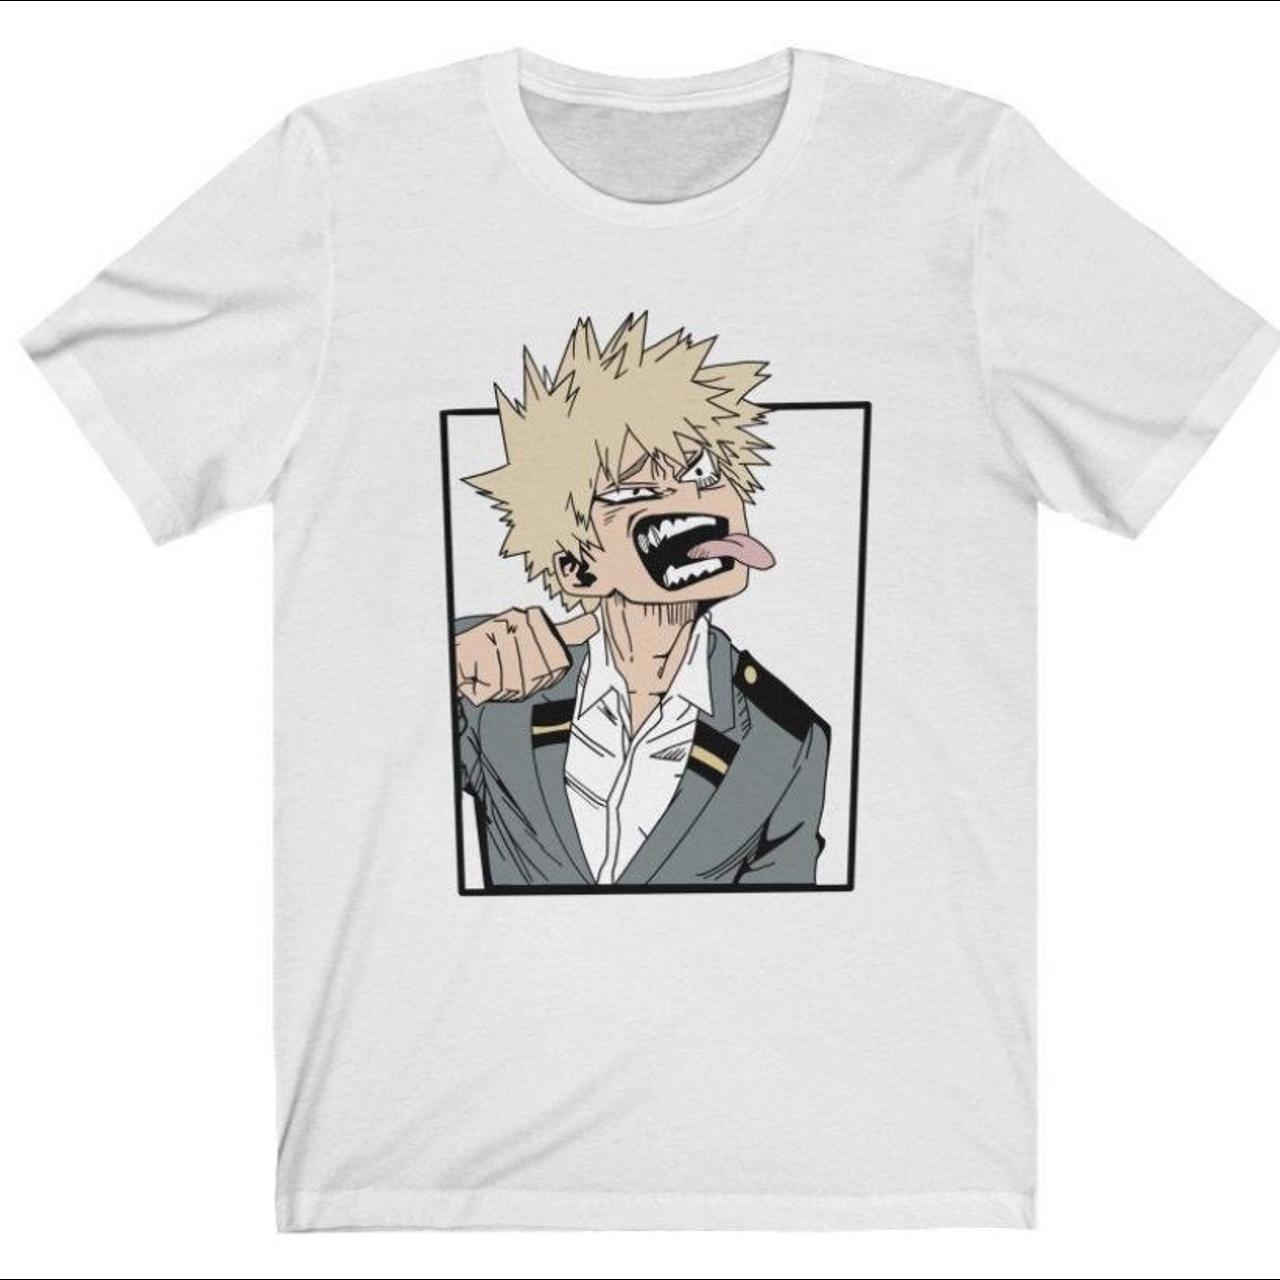 Bakugo T-shirt - this is a print on demand item and... - Depop